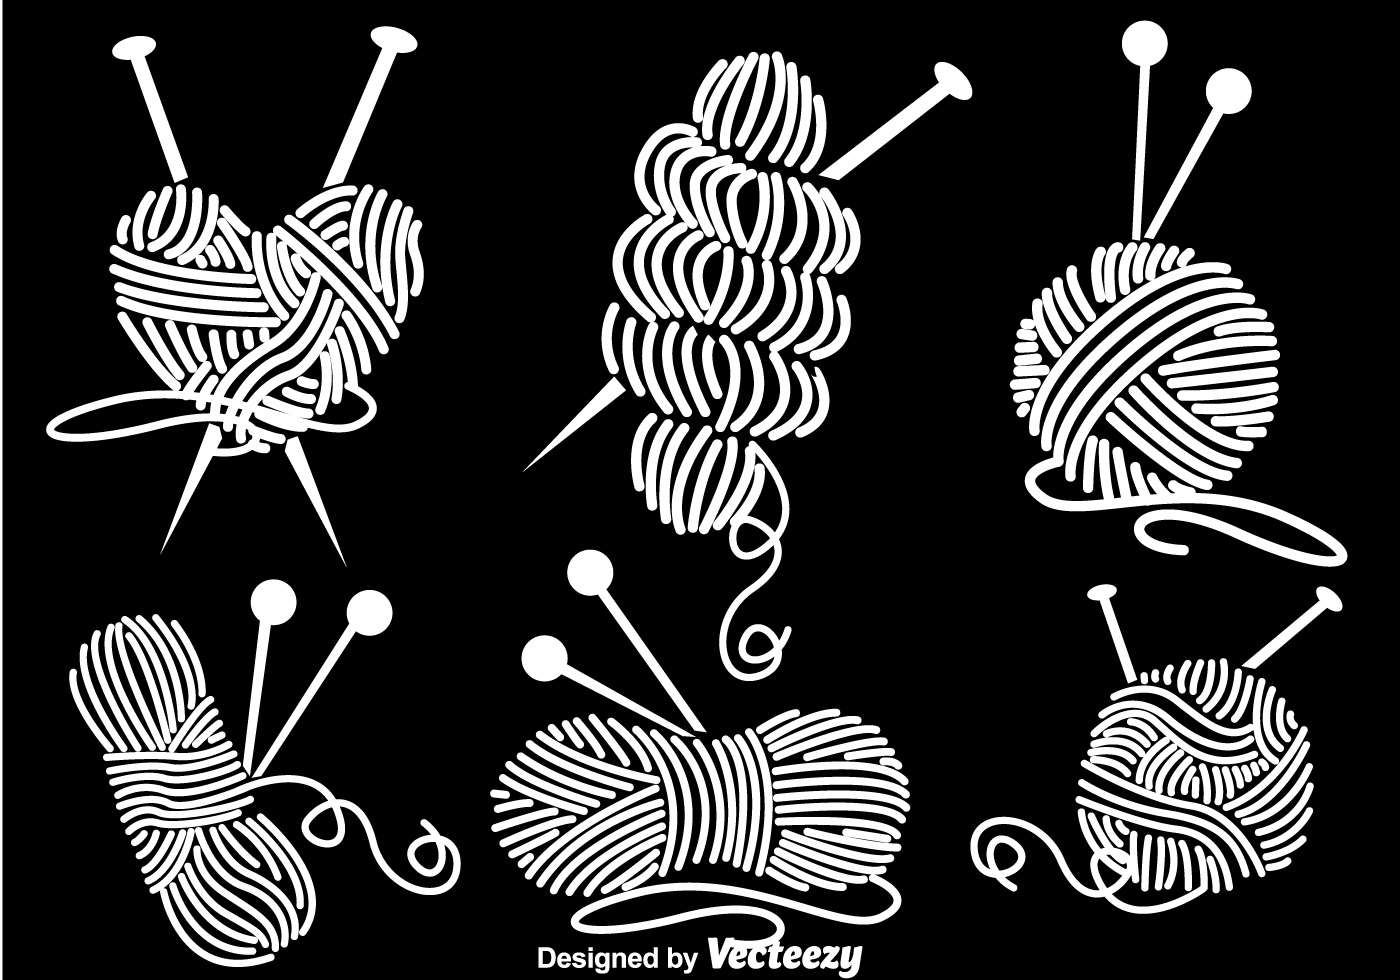 Download Ball Of Yarn White Icons - Download Free Vectors, Clipart ...